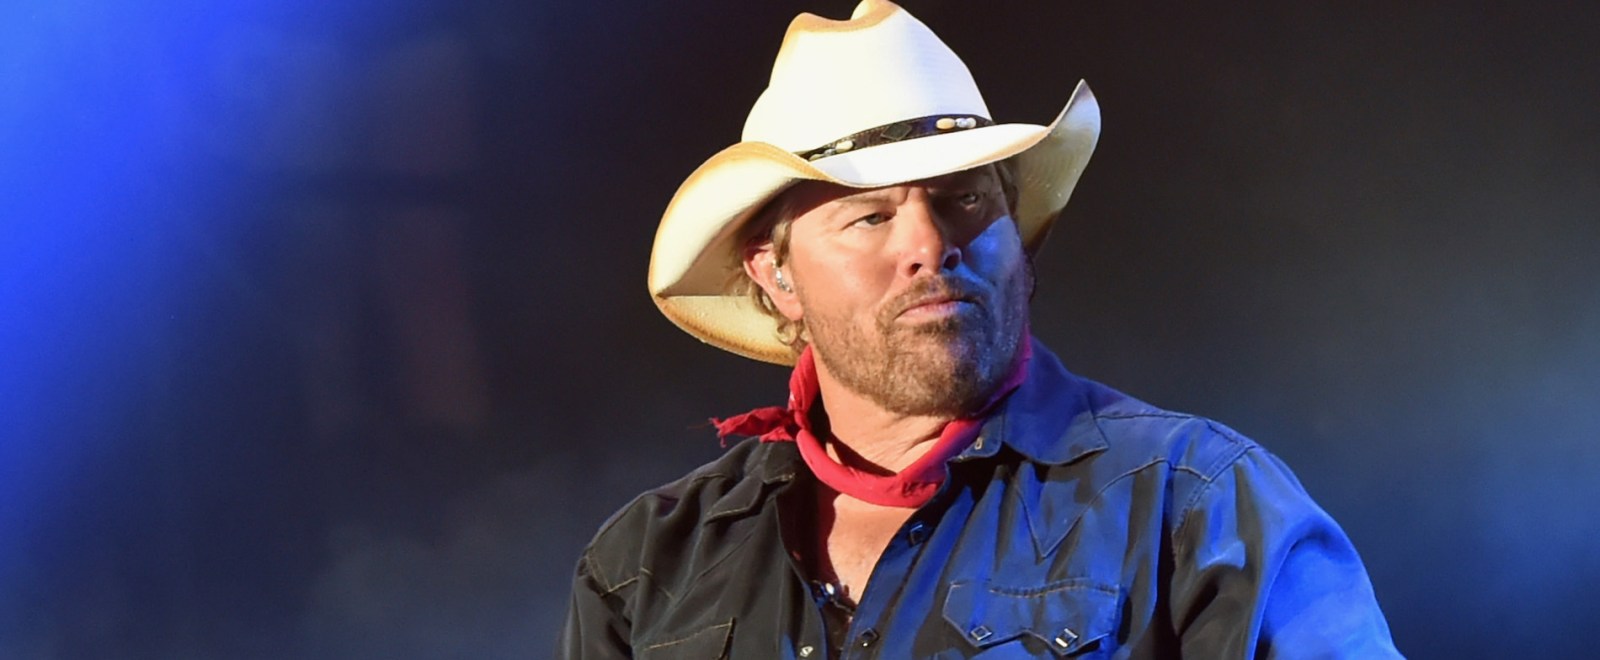 What Was Toby Keith's Cause Of Death?